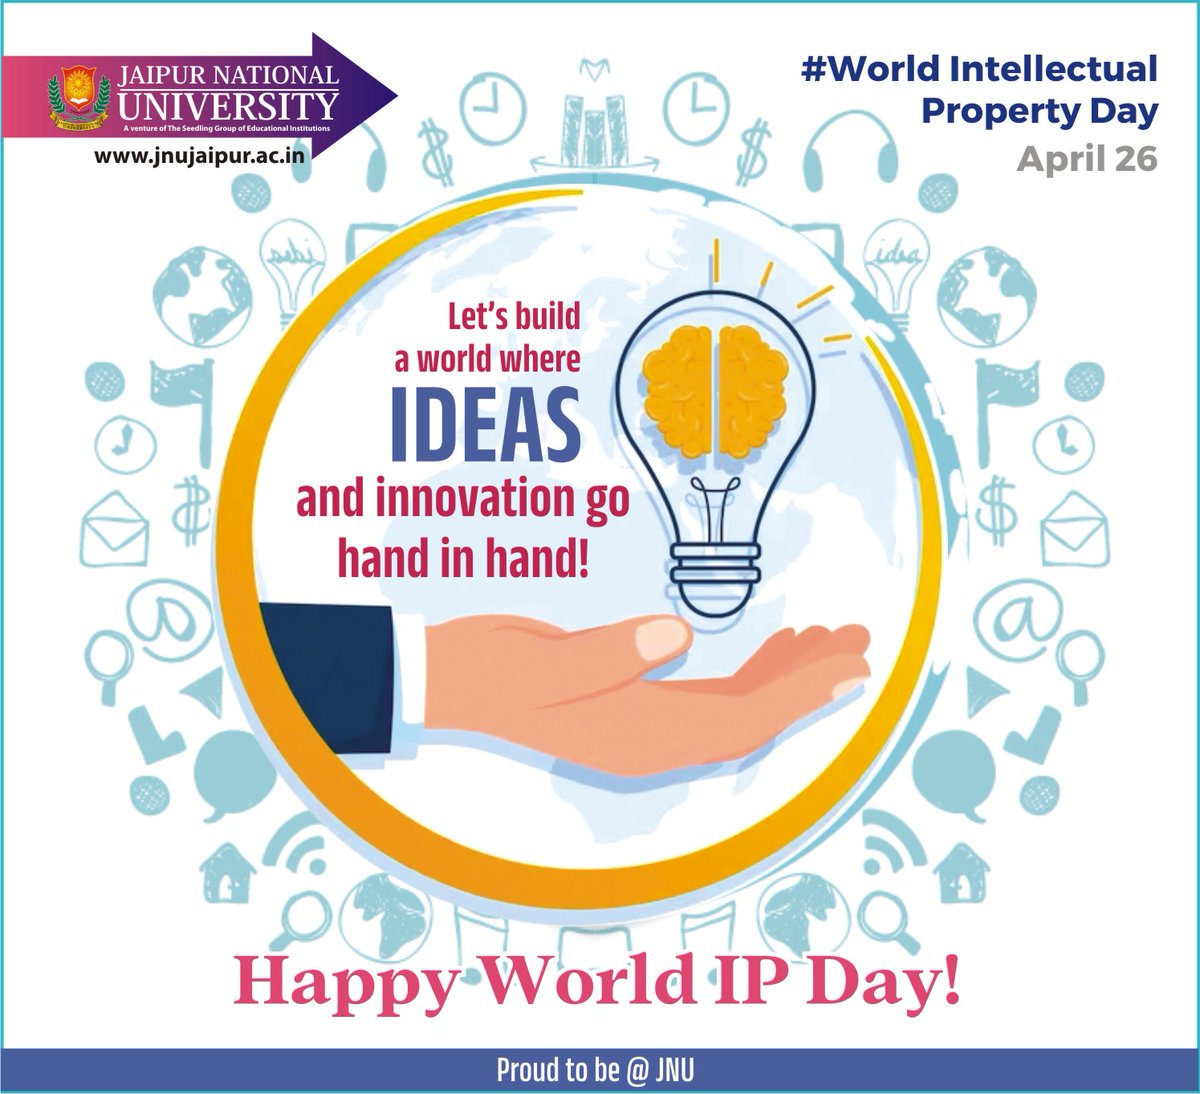 On #IntellectualPropertyDay, we salute the innovators, creators, and dreamers who inspire us with their groundbreaking work.
#intellectualpropertyday2023 #intellect #encourageinnovation #encouragecreativity #jnujaipur